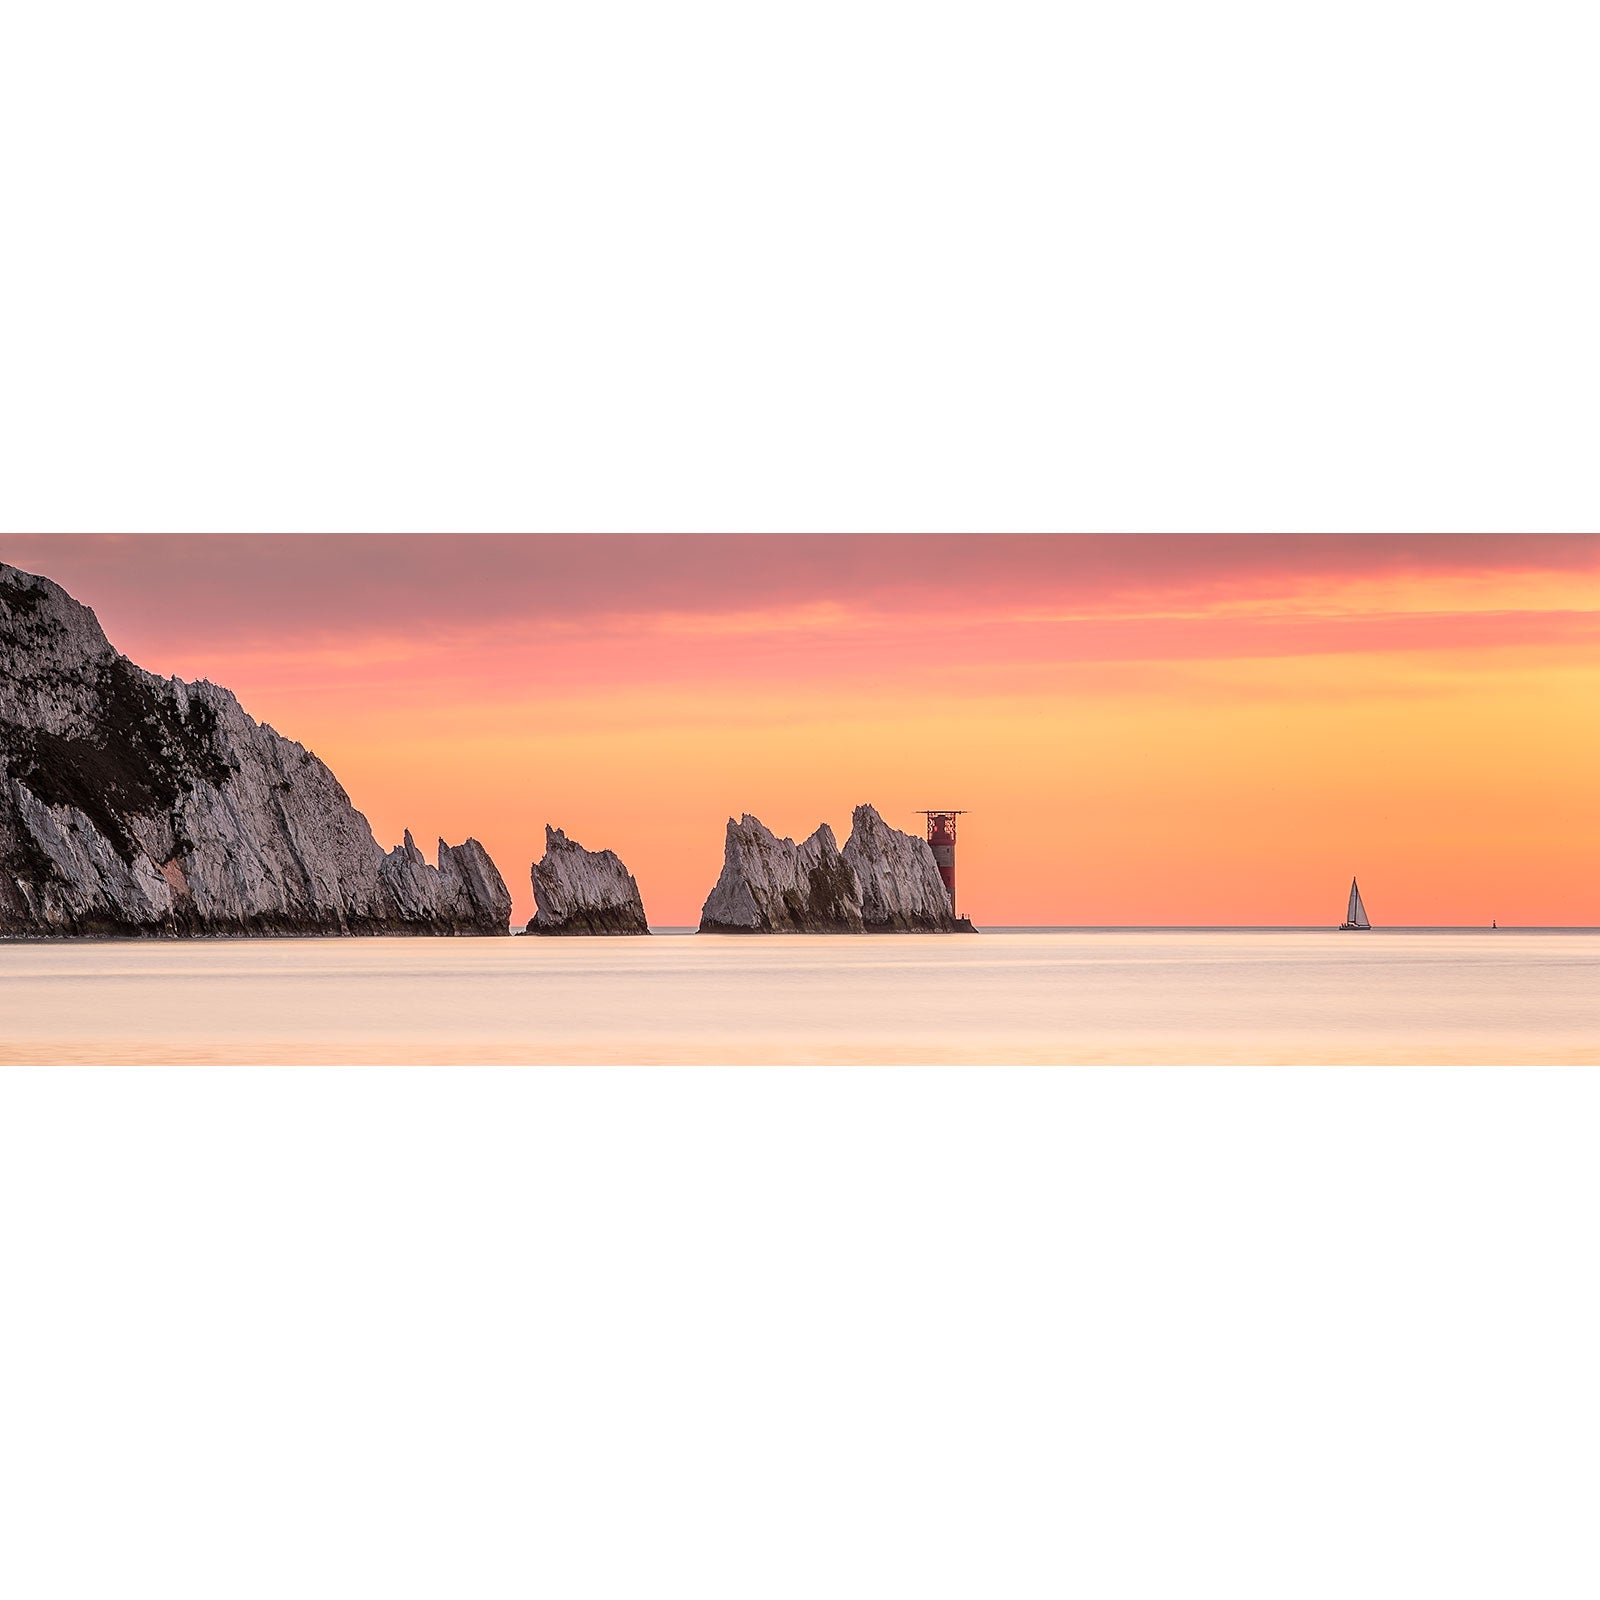 A serene sunset over a calm sea with silhouettes of cliffs and a distant sailboat on the horizon. Image number: 2828 The Needles by Available Light Photography.